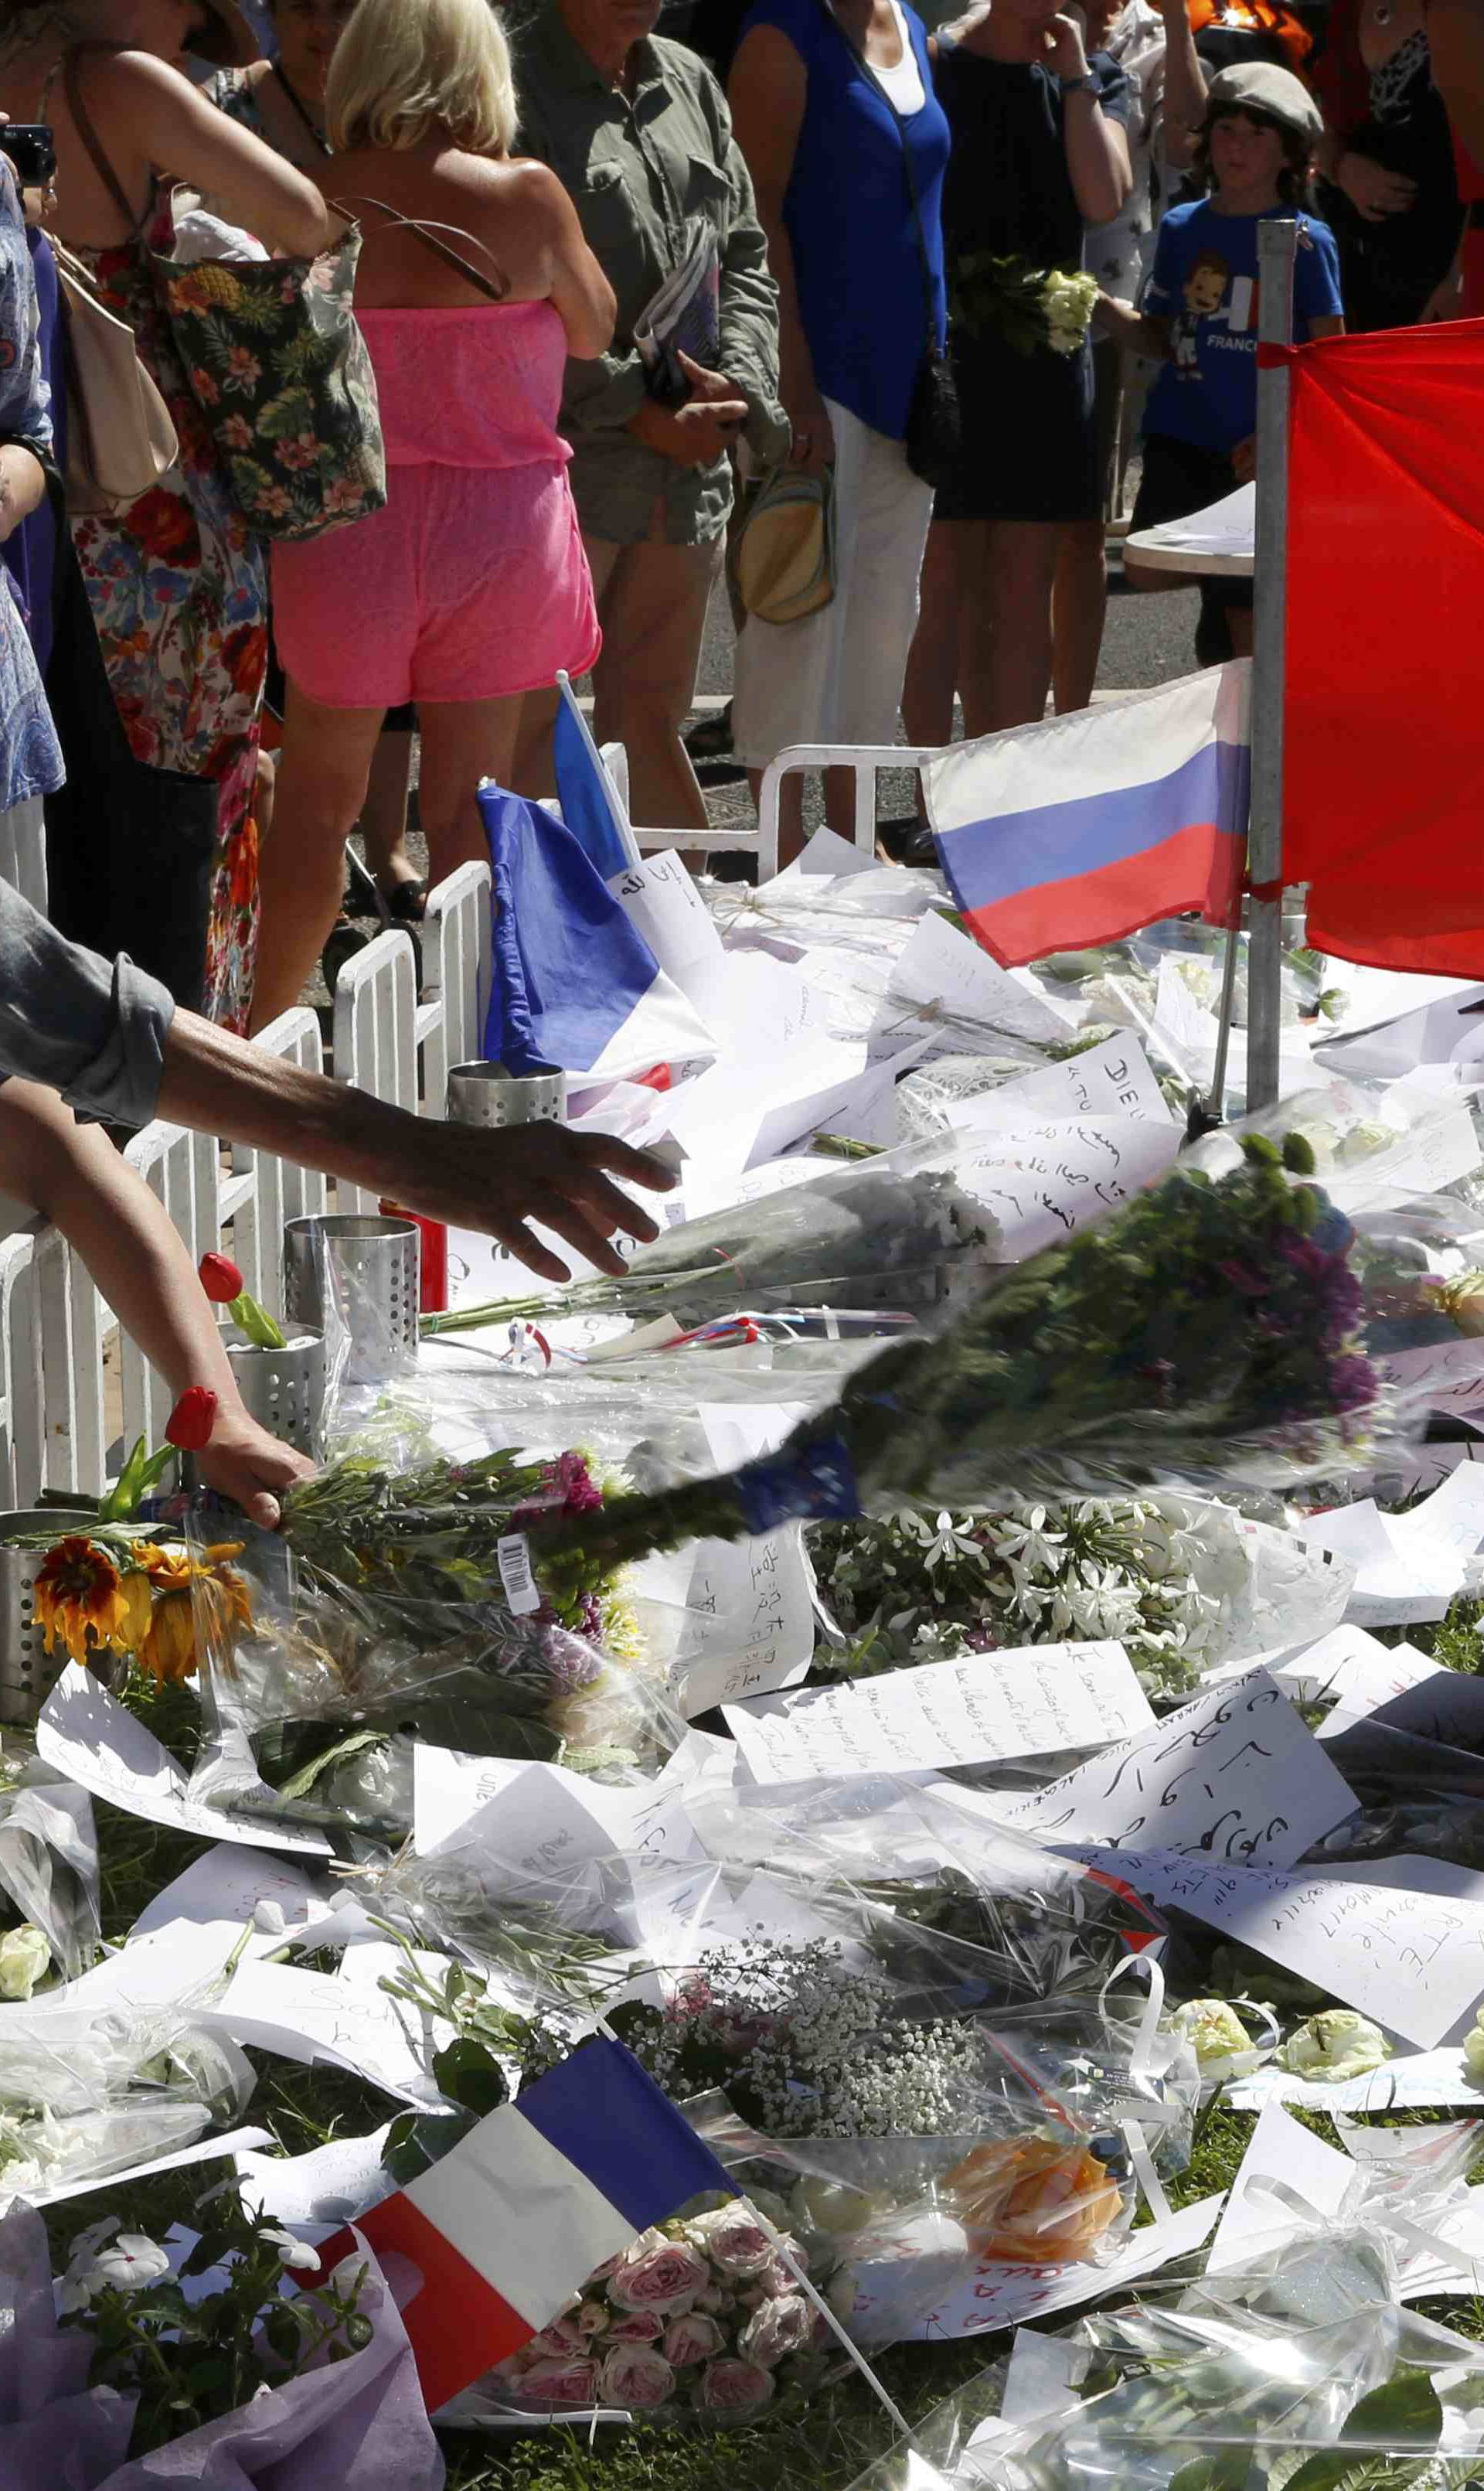 A woman adds a bouquet of flower in tribute to victims, two days after an attack by the driver of a heavy truck who ran into a crowd on Bastille Day killing scores and injuring as many, in Nice